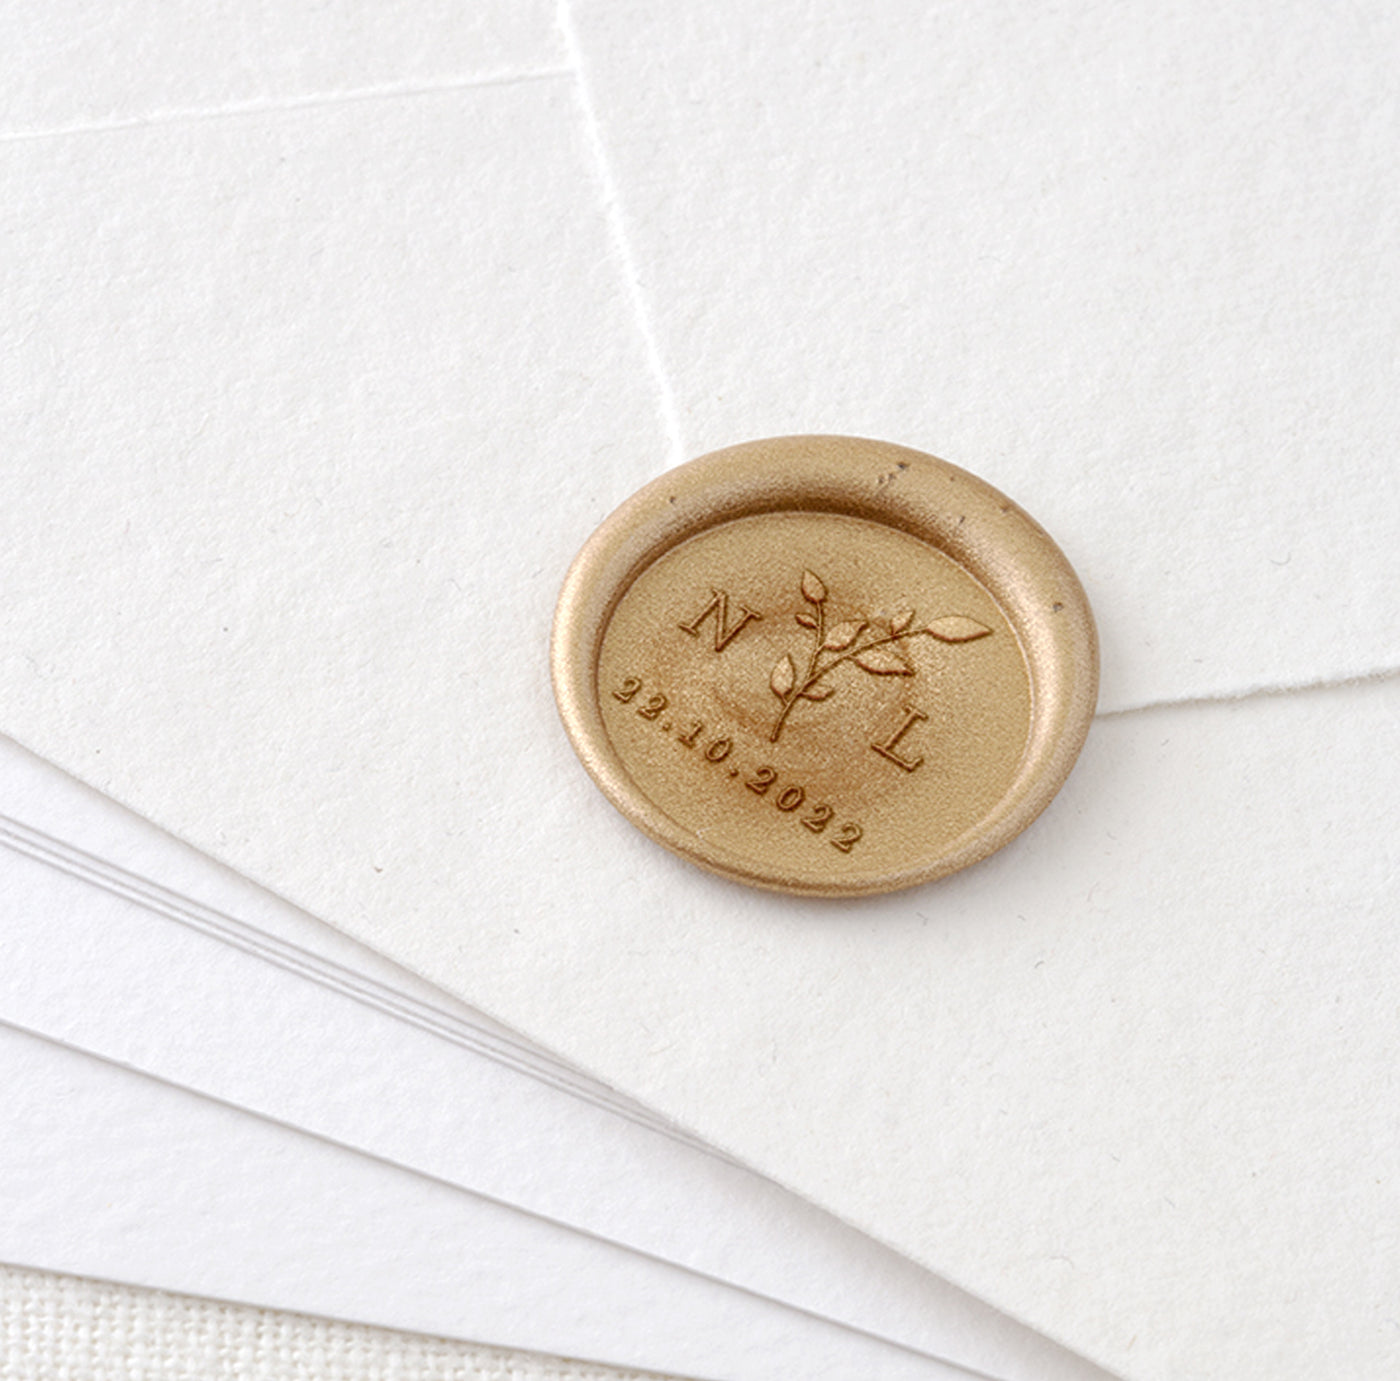 SAVE THE DATE MONOGRAM WAX SEAL STAMP - ANNABELLE